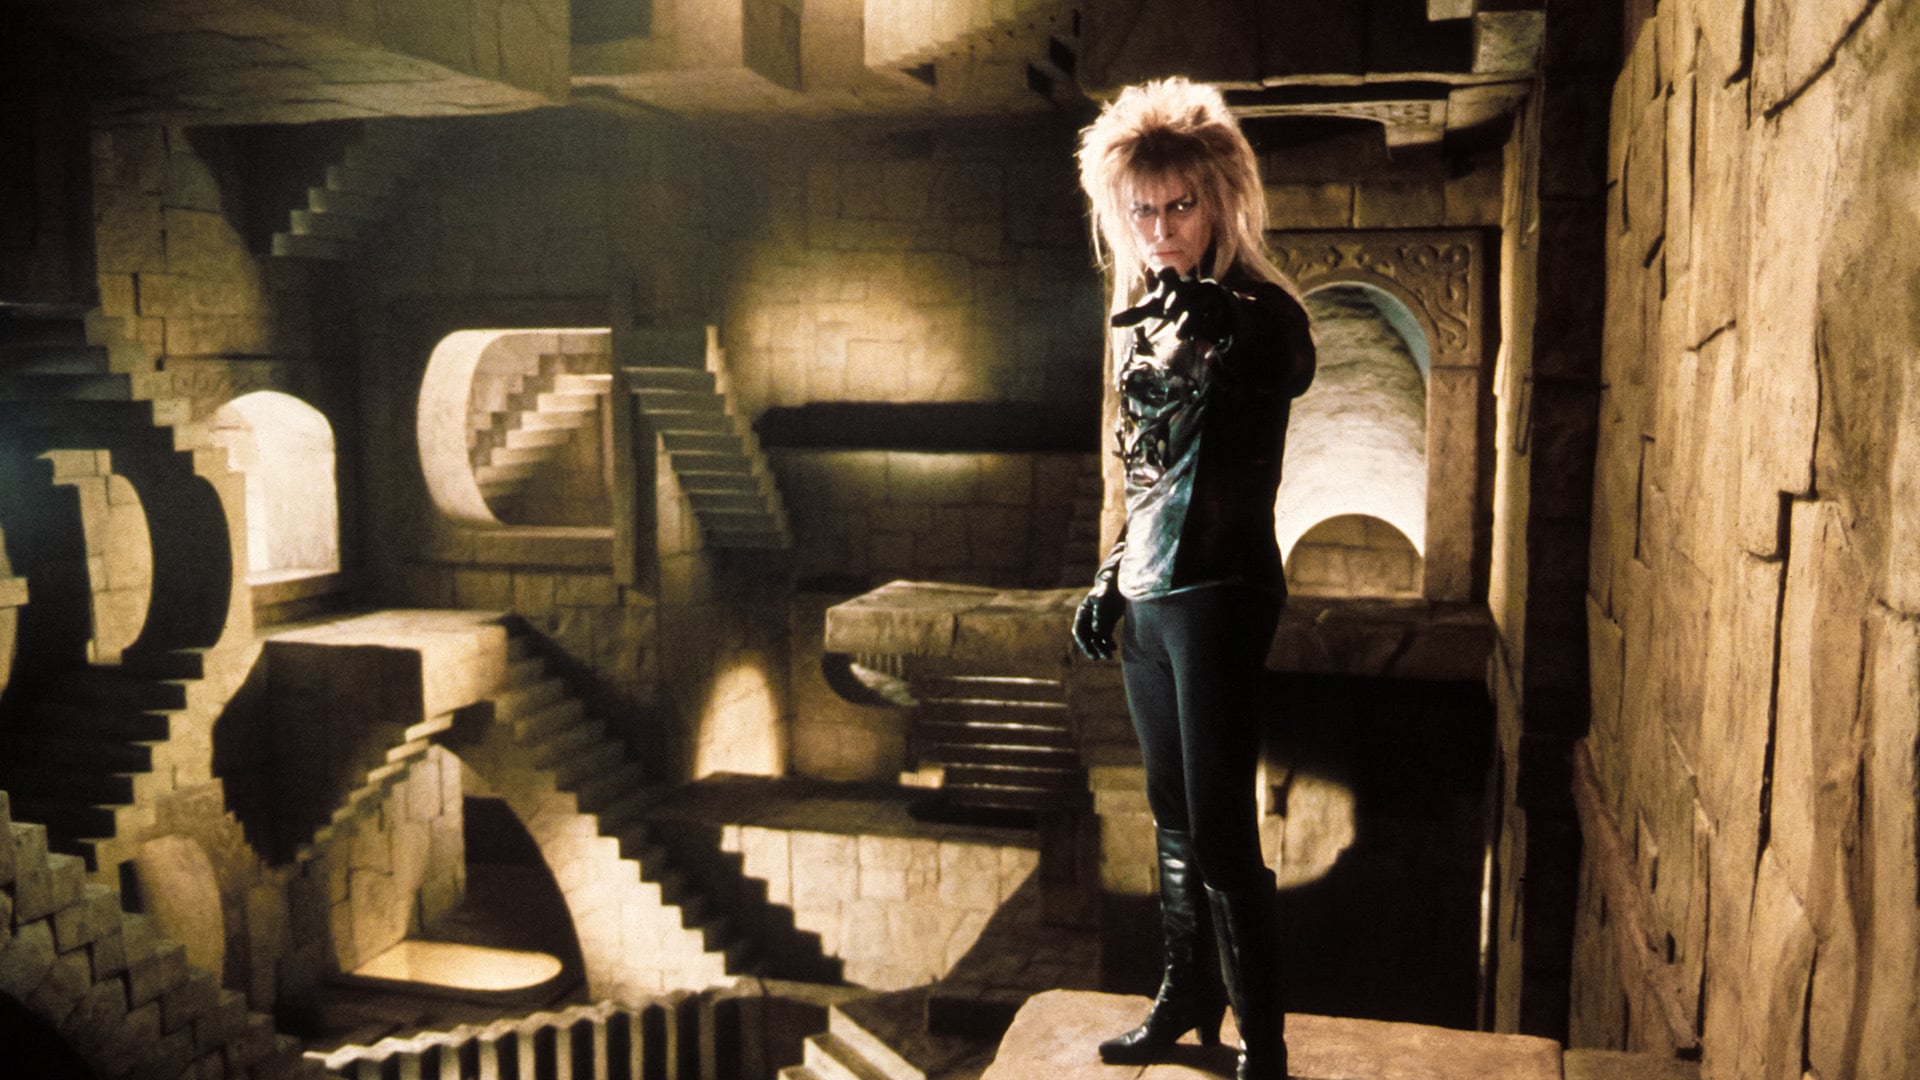 David Bowie stands in a stone labyrinth wears black leggings, blouse and gloves